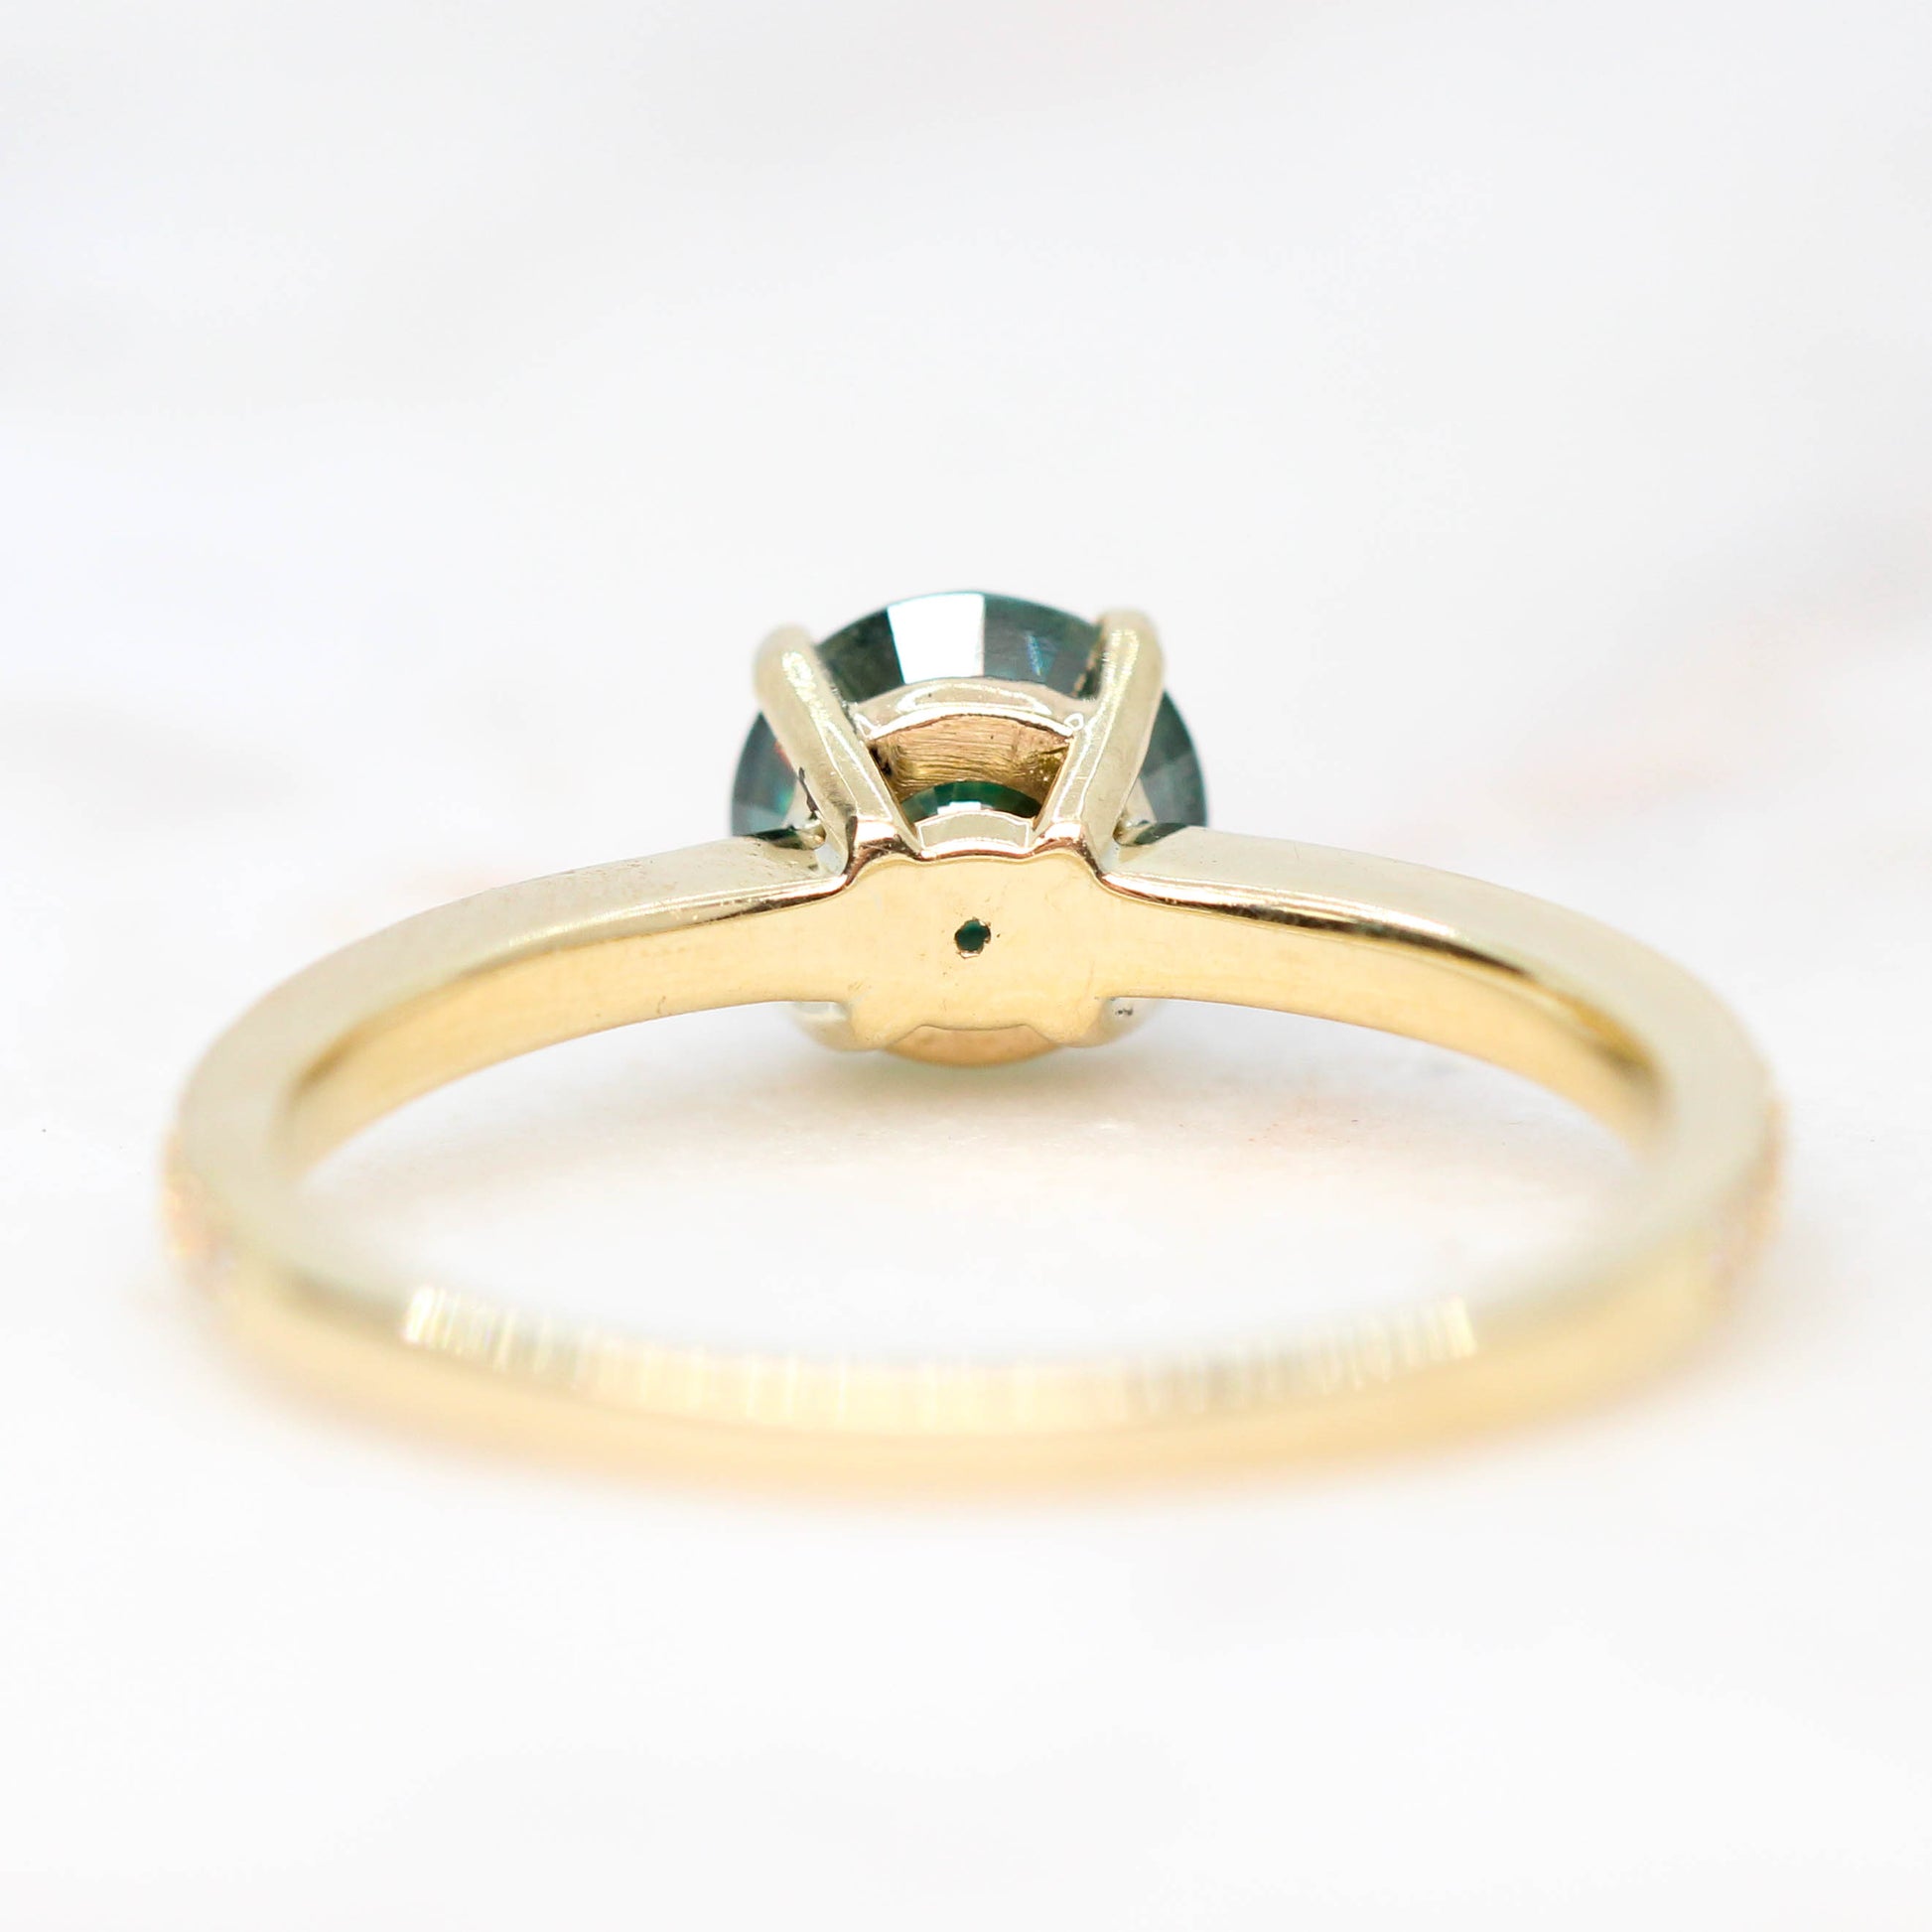 Imani Ring with a 0.80 Carat Round Black and Teal Moissanite and White Accent Diamonds in 14k Yellow Gold - Ready to Size and Ship - Midwinter Co. Alternative Bridal Rings and Modern Fine Jewelry